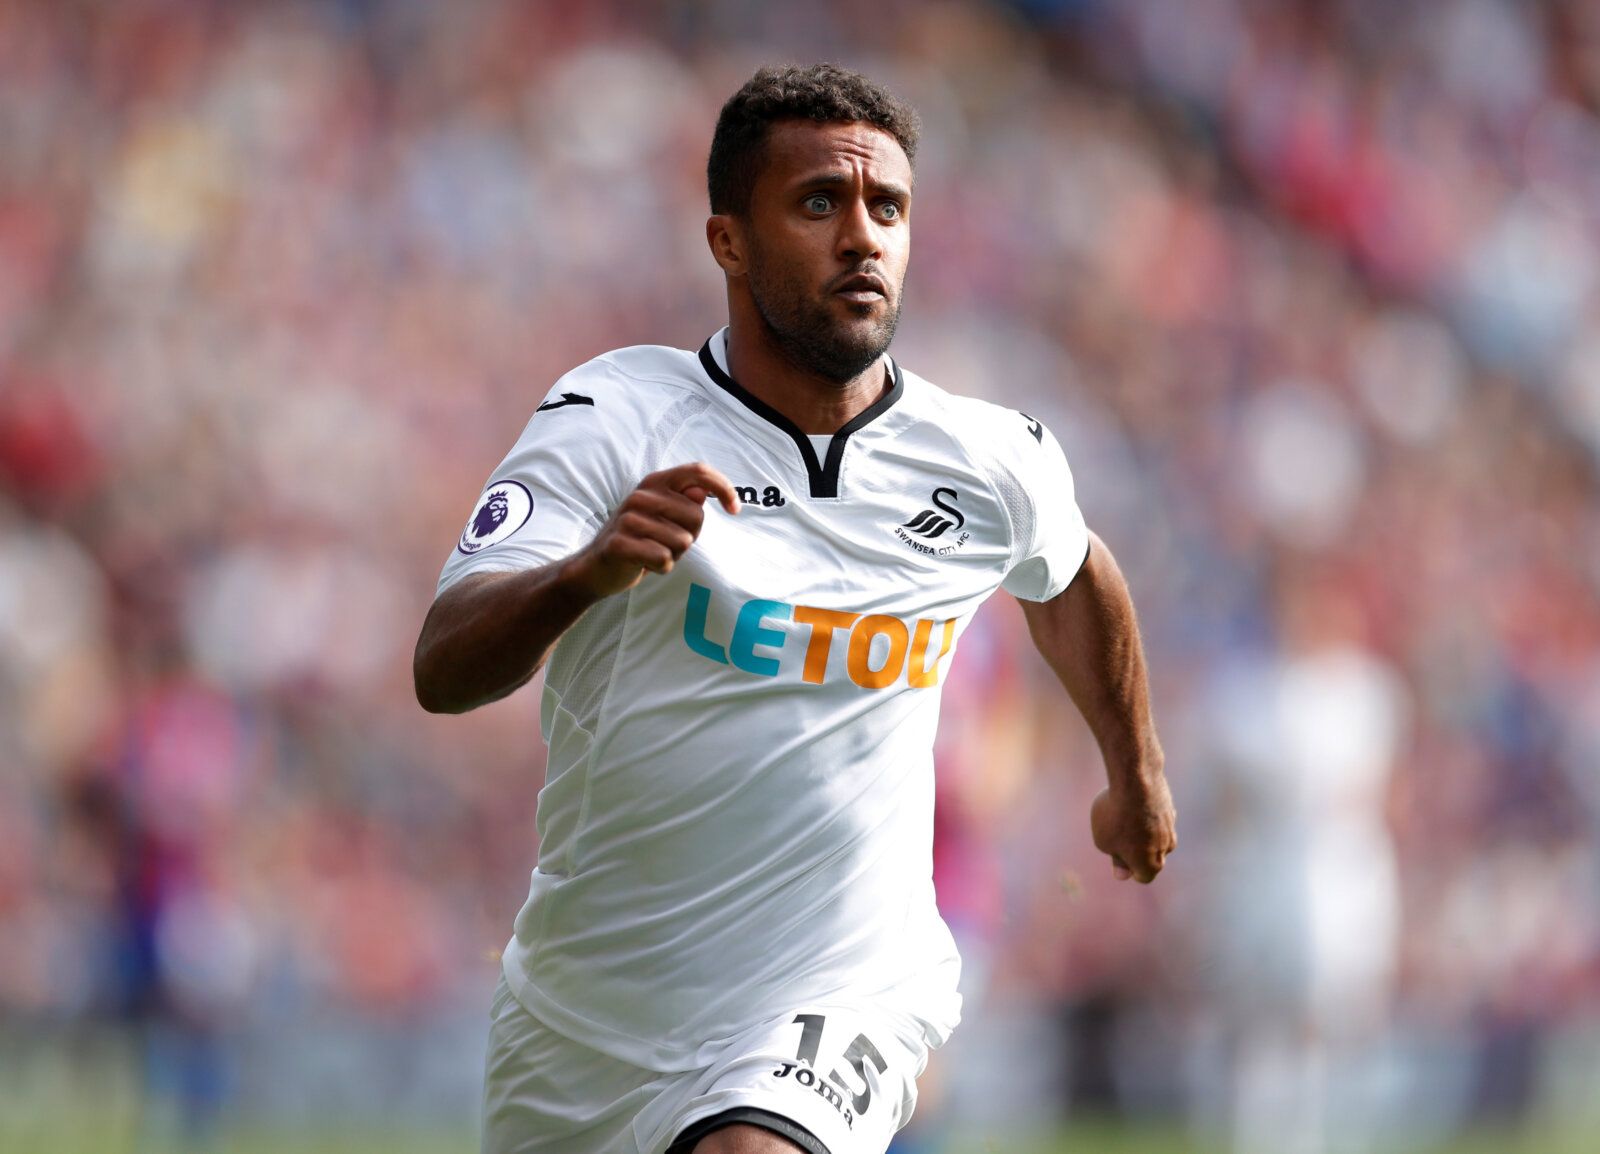 Football Soccer - Premier League - Crystal Palace vs Swansea City - London, Britain - August 26, 2017   Swansea City's Wayne Routledge in action   Action Images via Reuters/Andrew Couldridge    EDITORIAL USE ONLY. No use with unauthorized audio, video, data, fixture lists, club/league logos or 